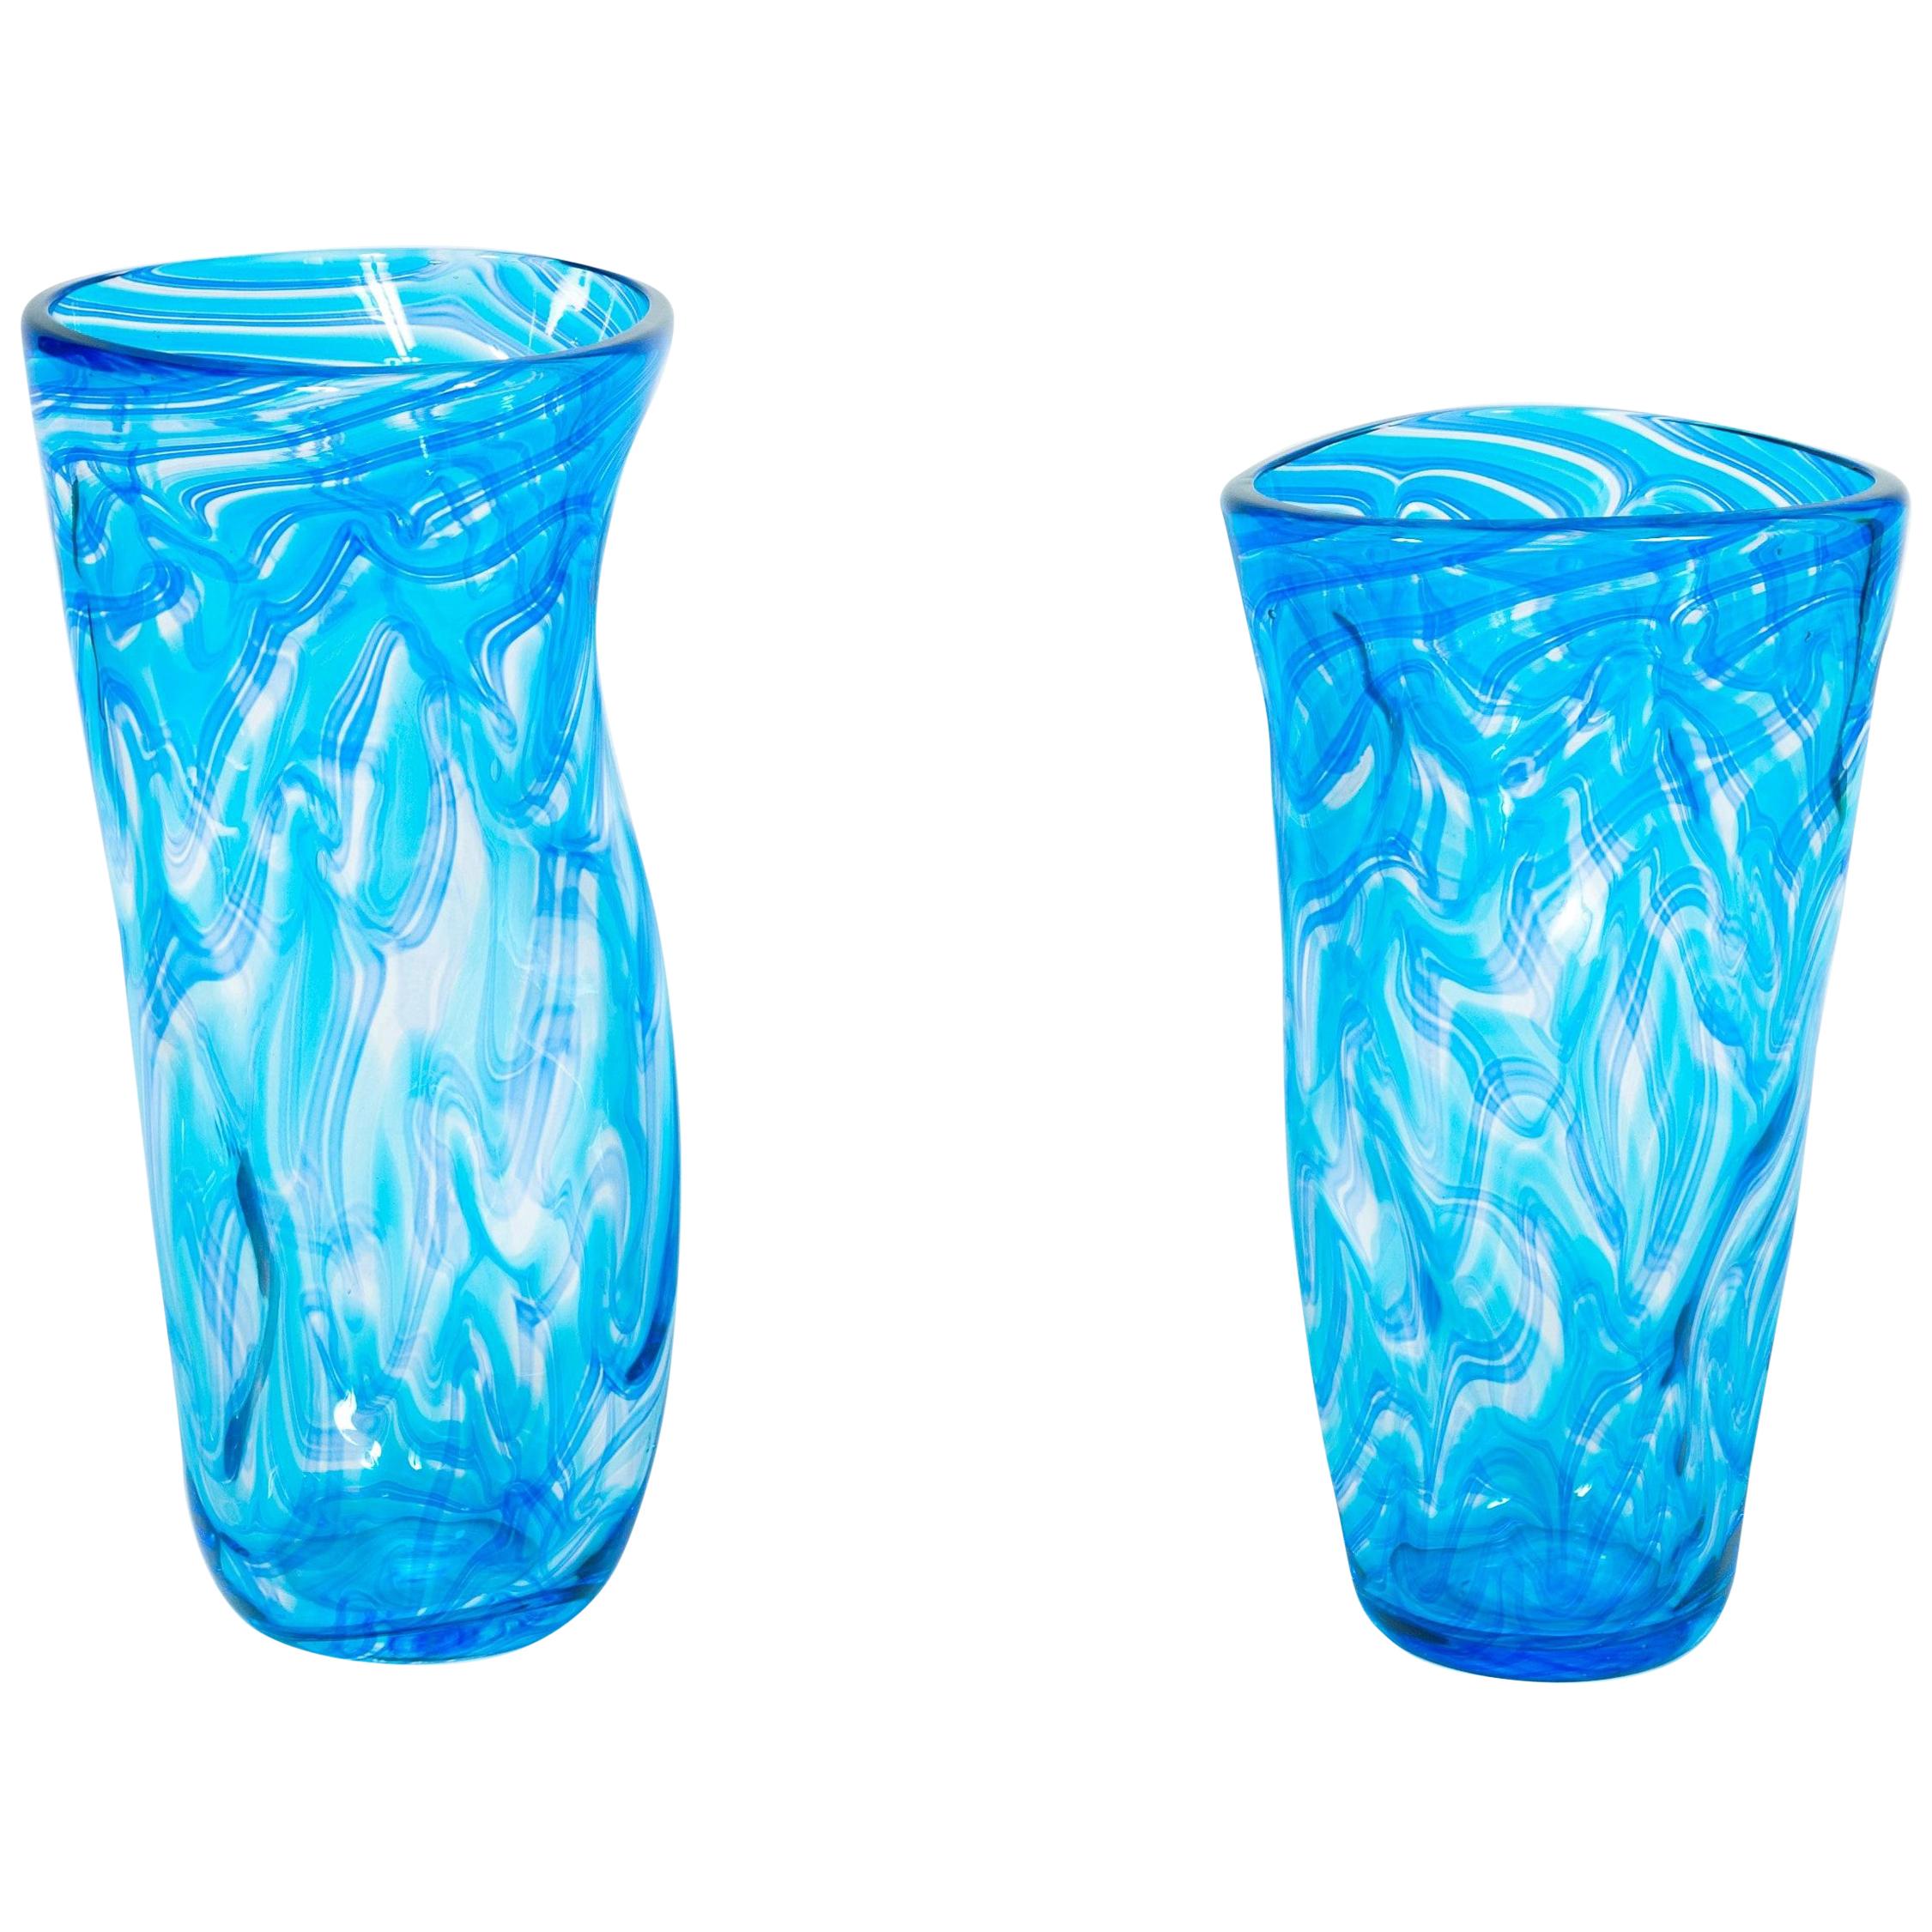 Pair of Twisted Vases in Blown Murano Glass Blue Color with Waves Pattern, Italy